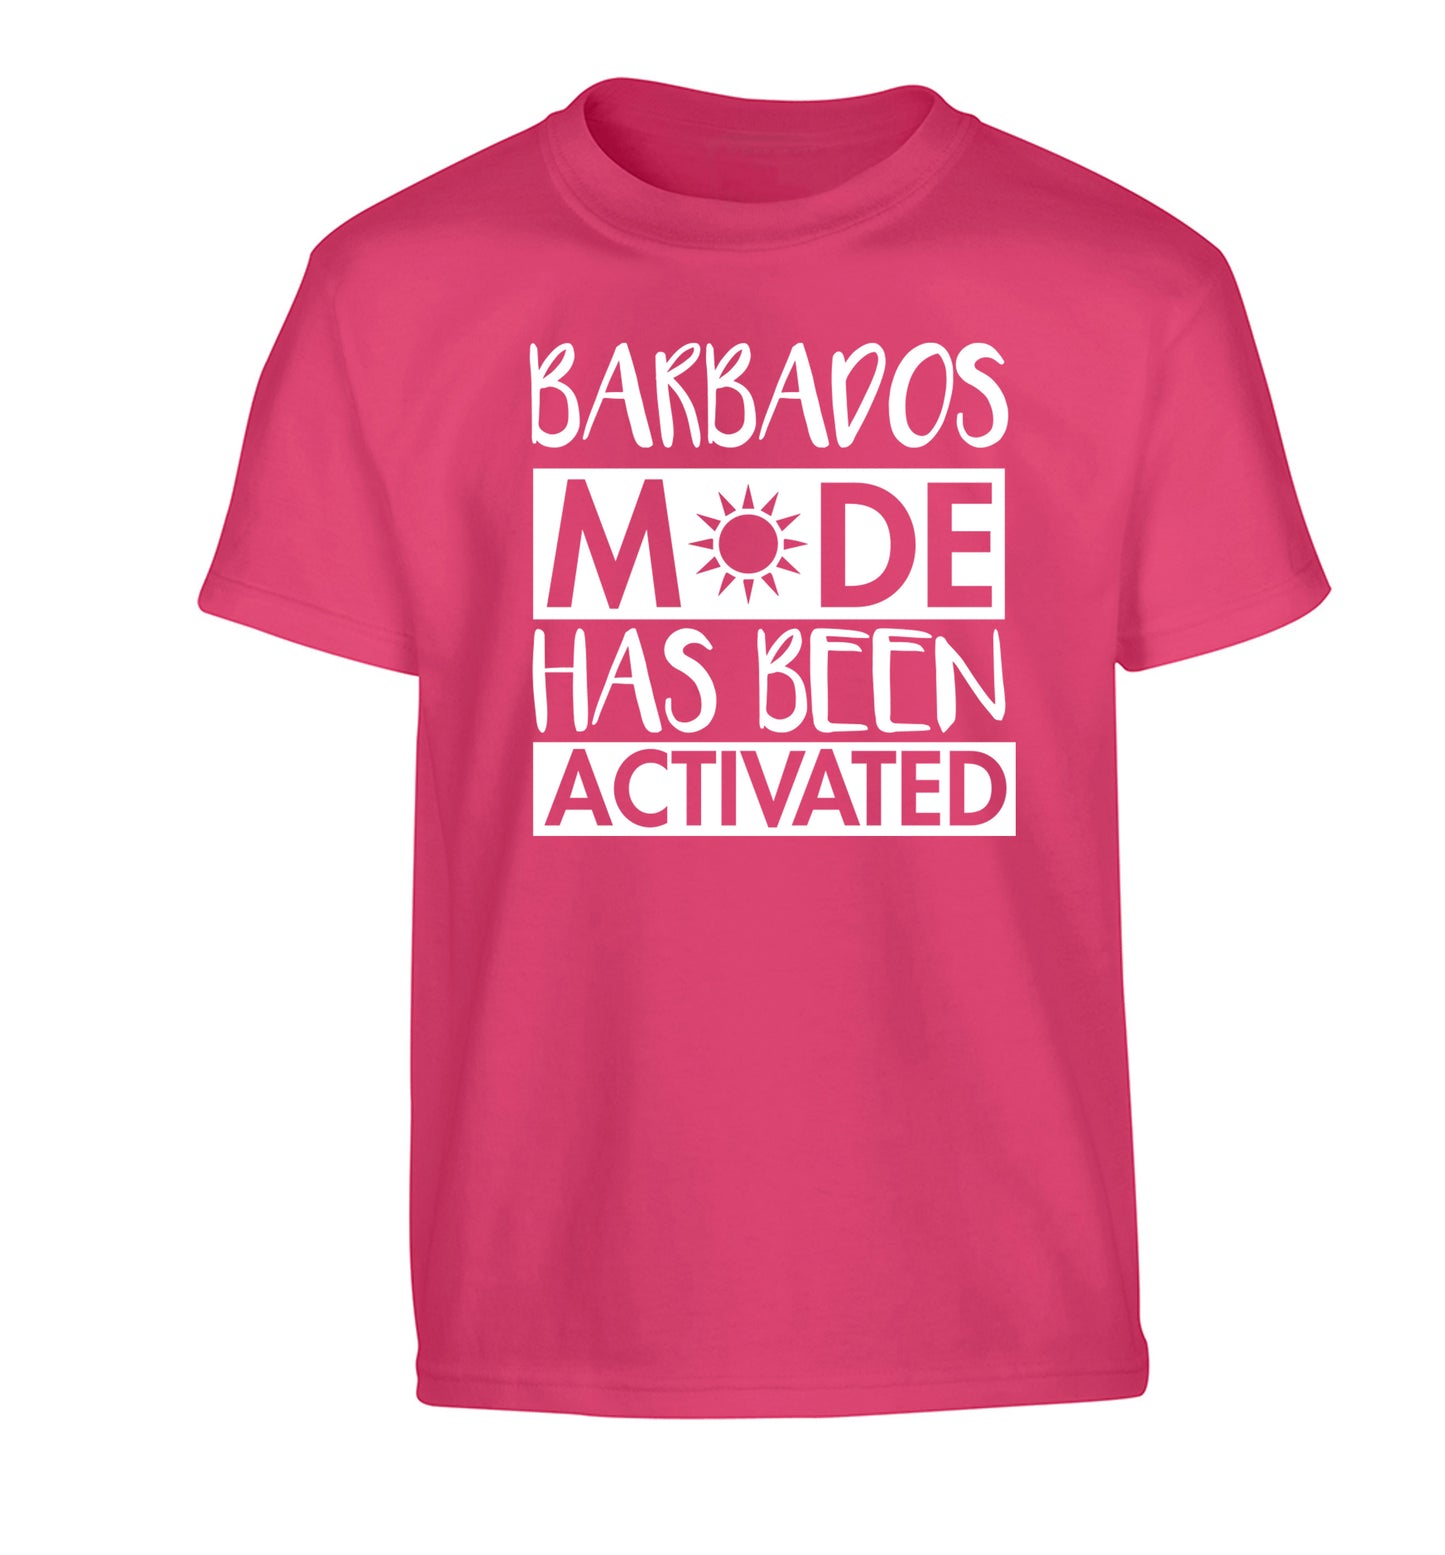 Barbados mode has been activated Children's pink Tshirt 12-13 Years